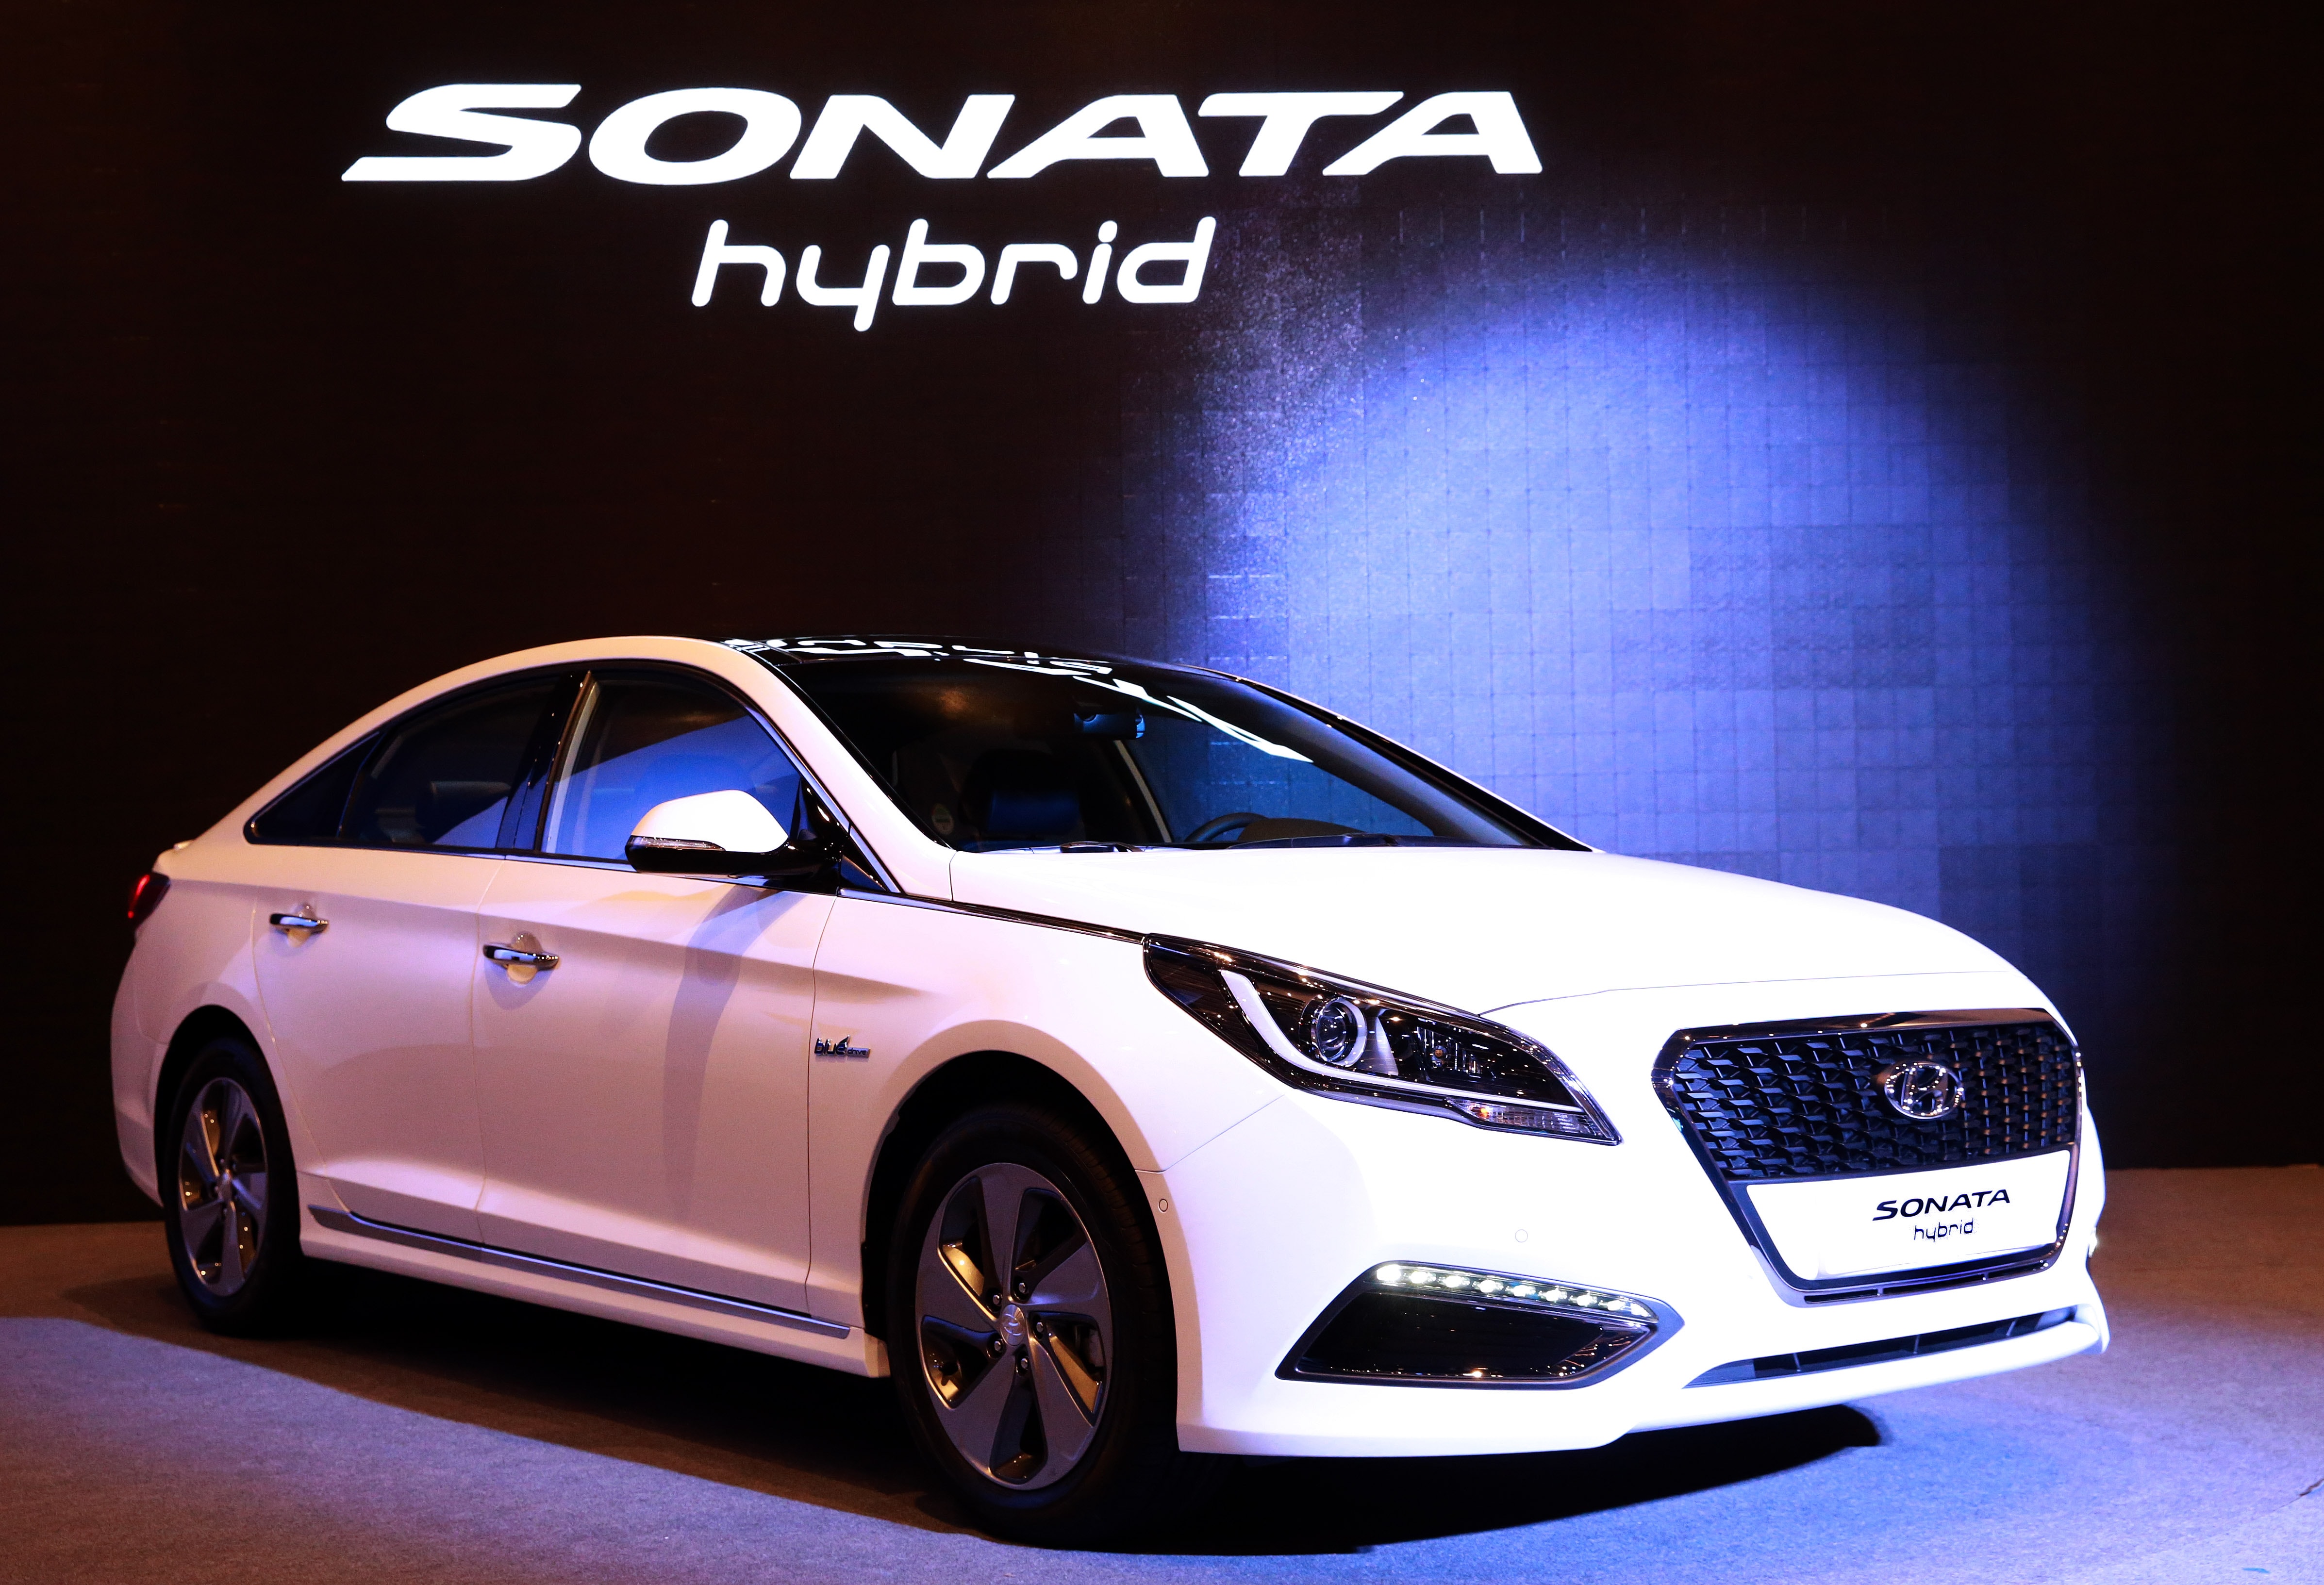 2016 Hyundai Sonata Hybrid Previewed at Launch Event in ...